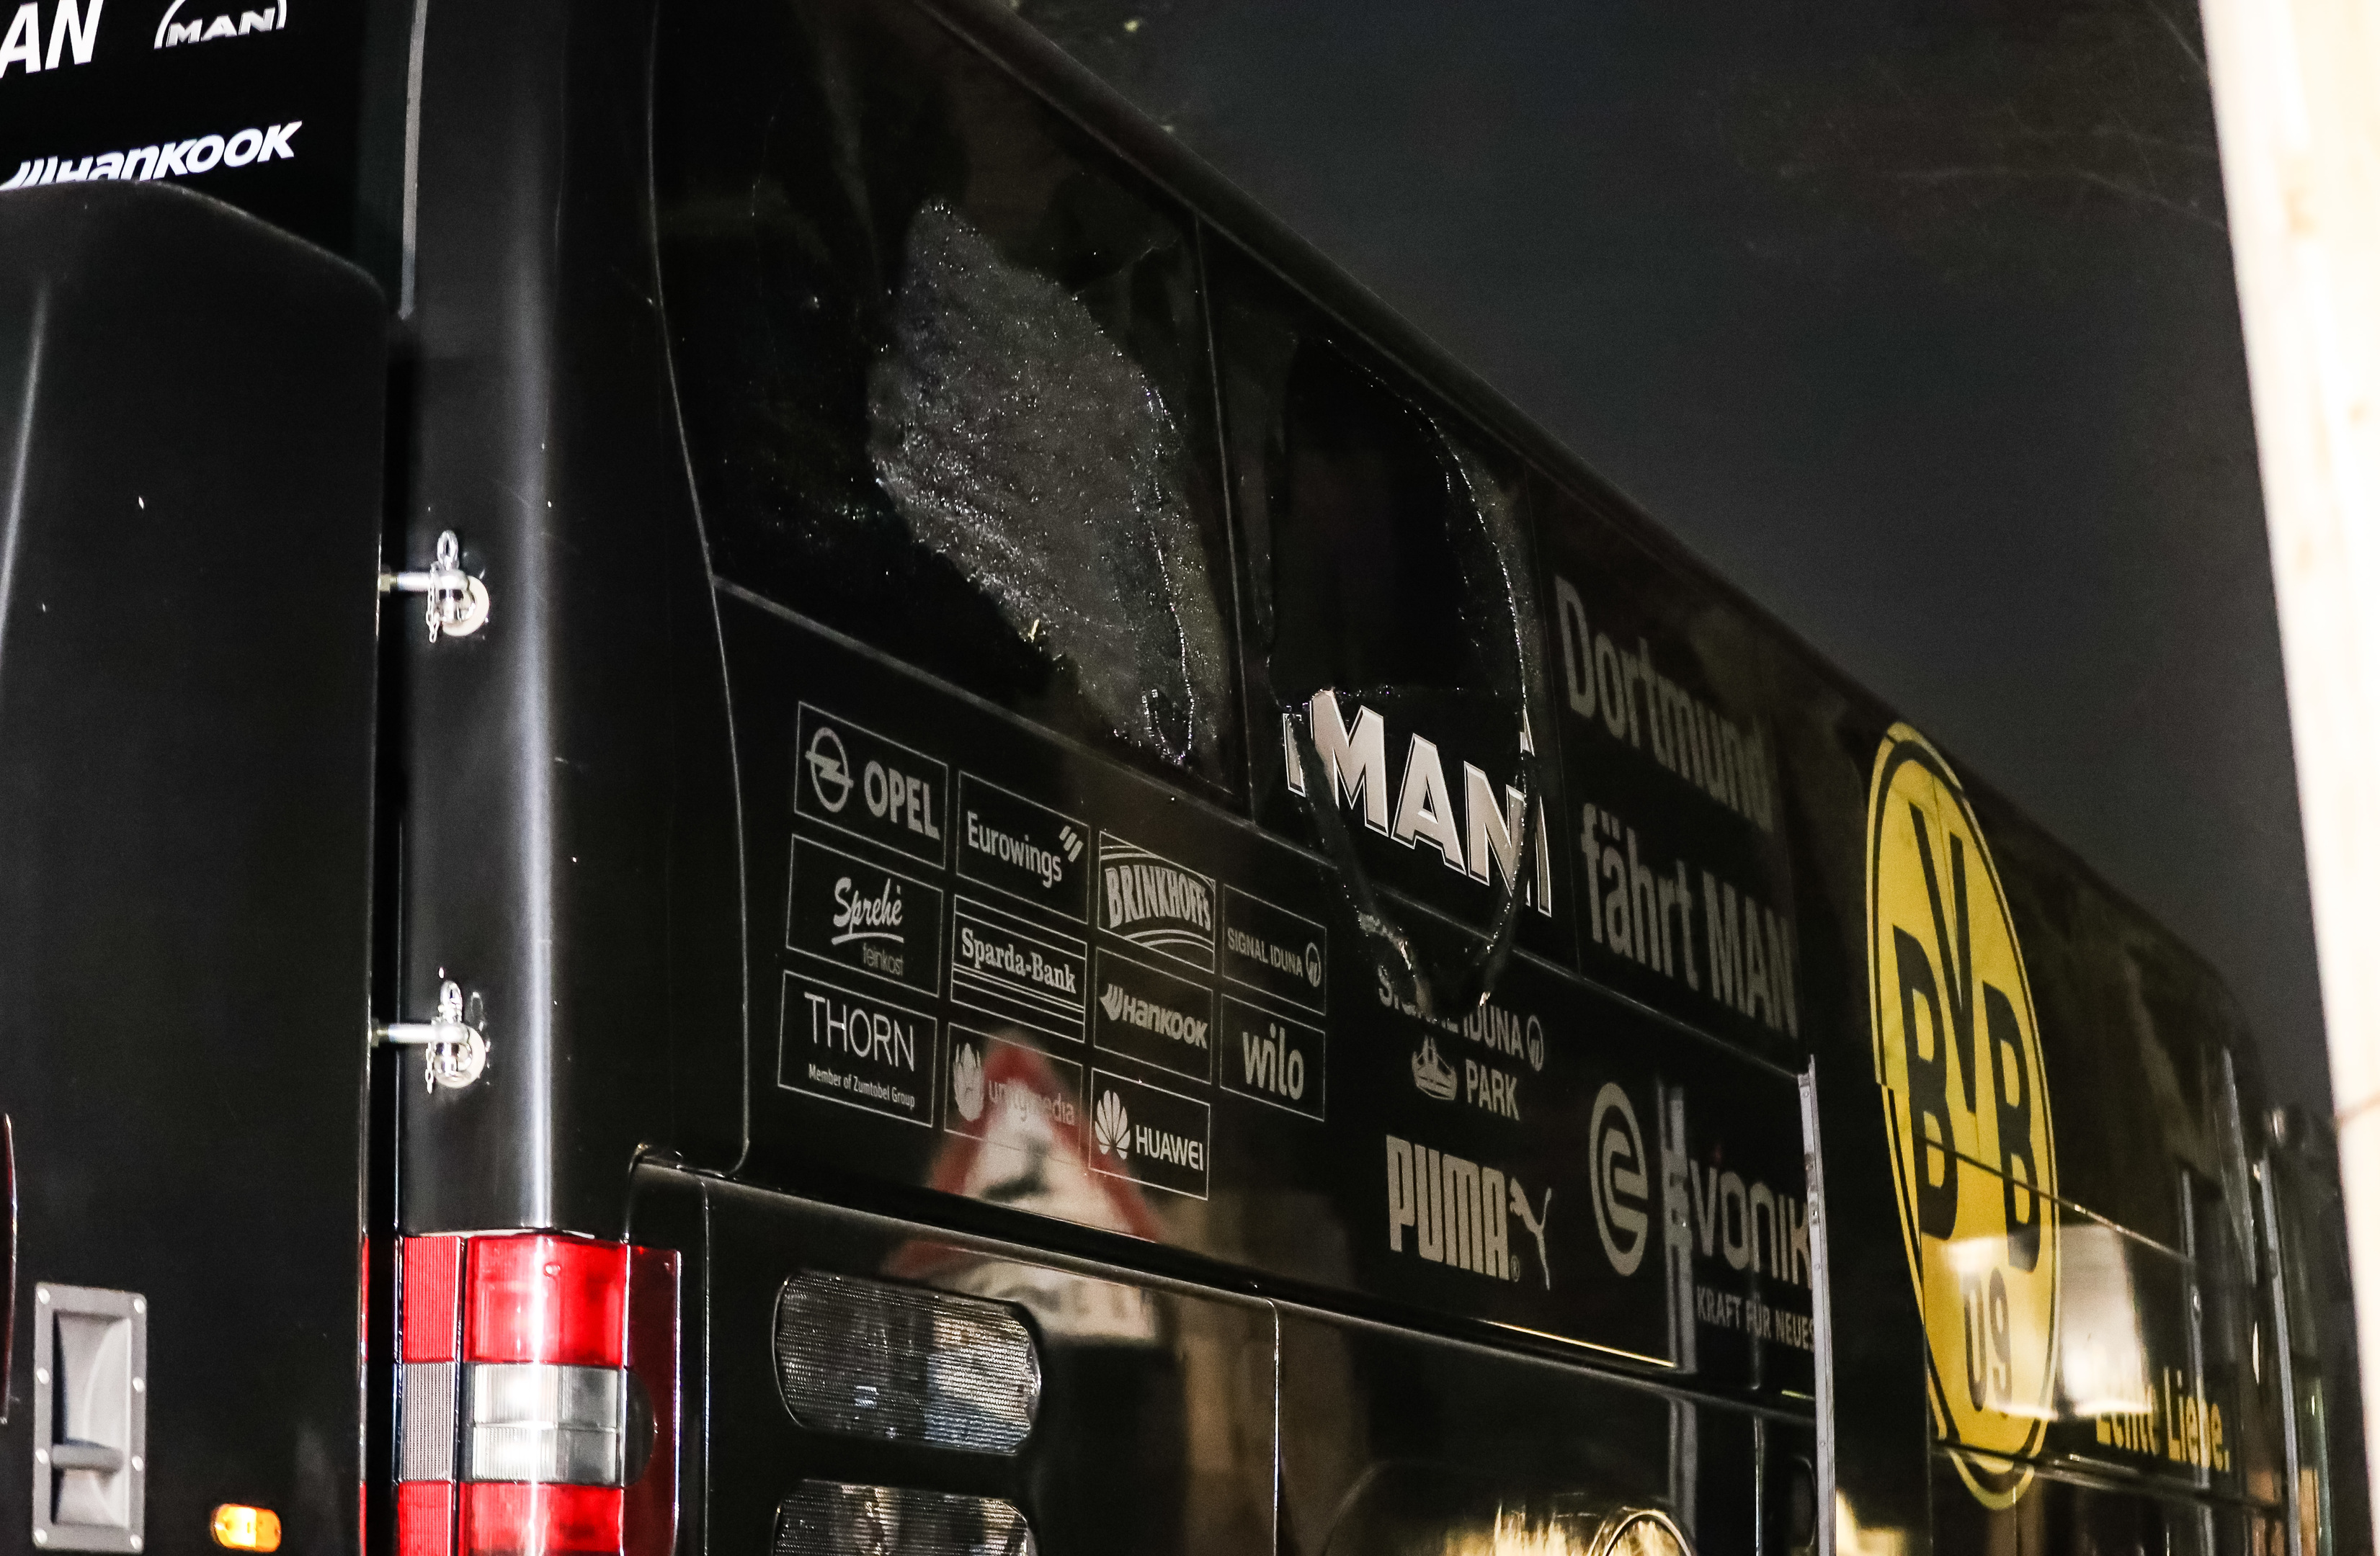 Team bus of the Borussia Dortmund football club damaged in an explosion (Maja Hitij/Getty Images)